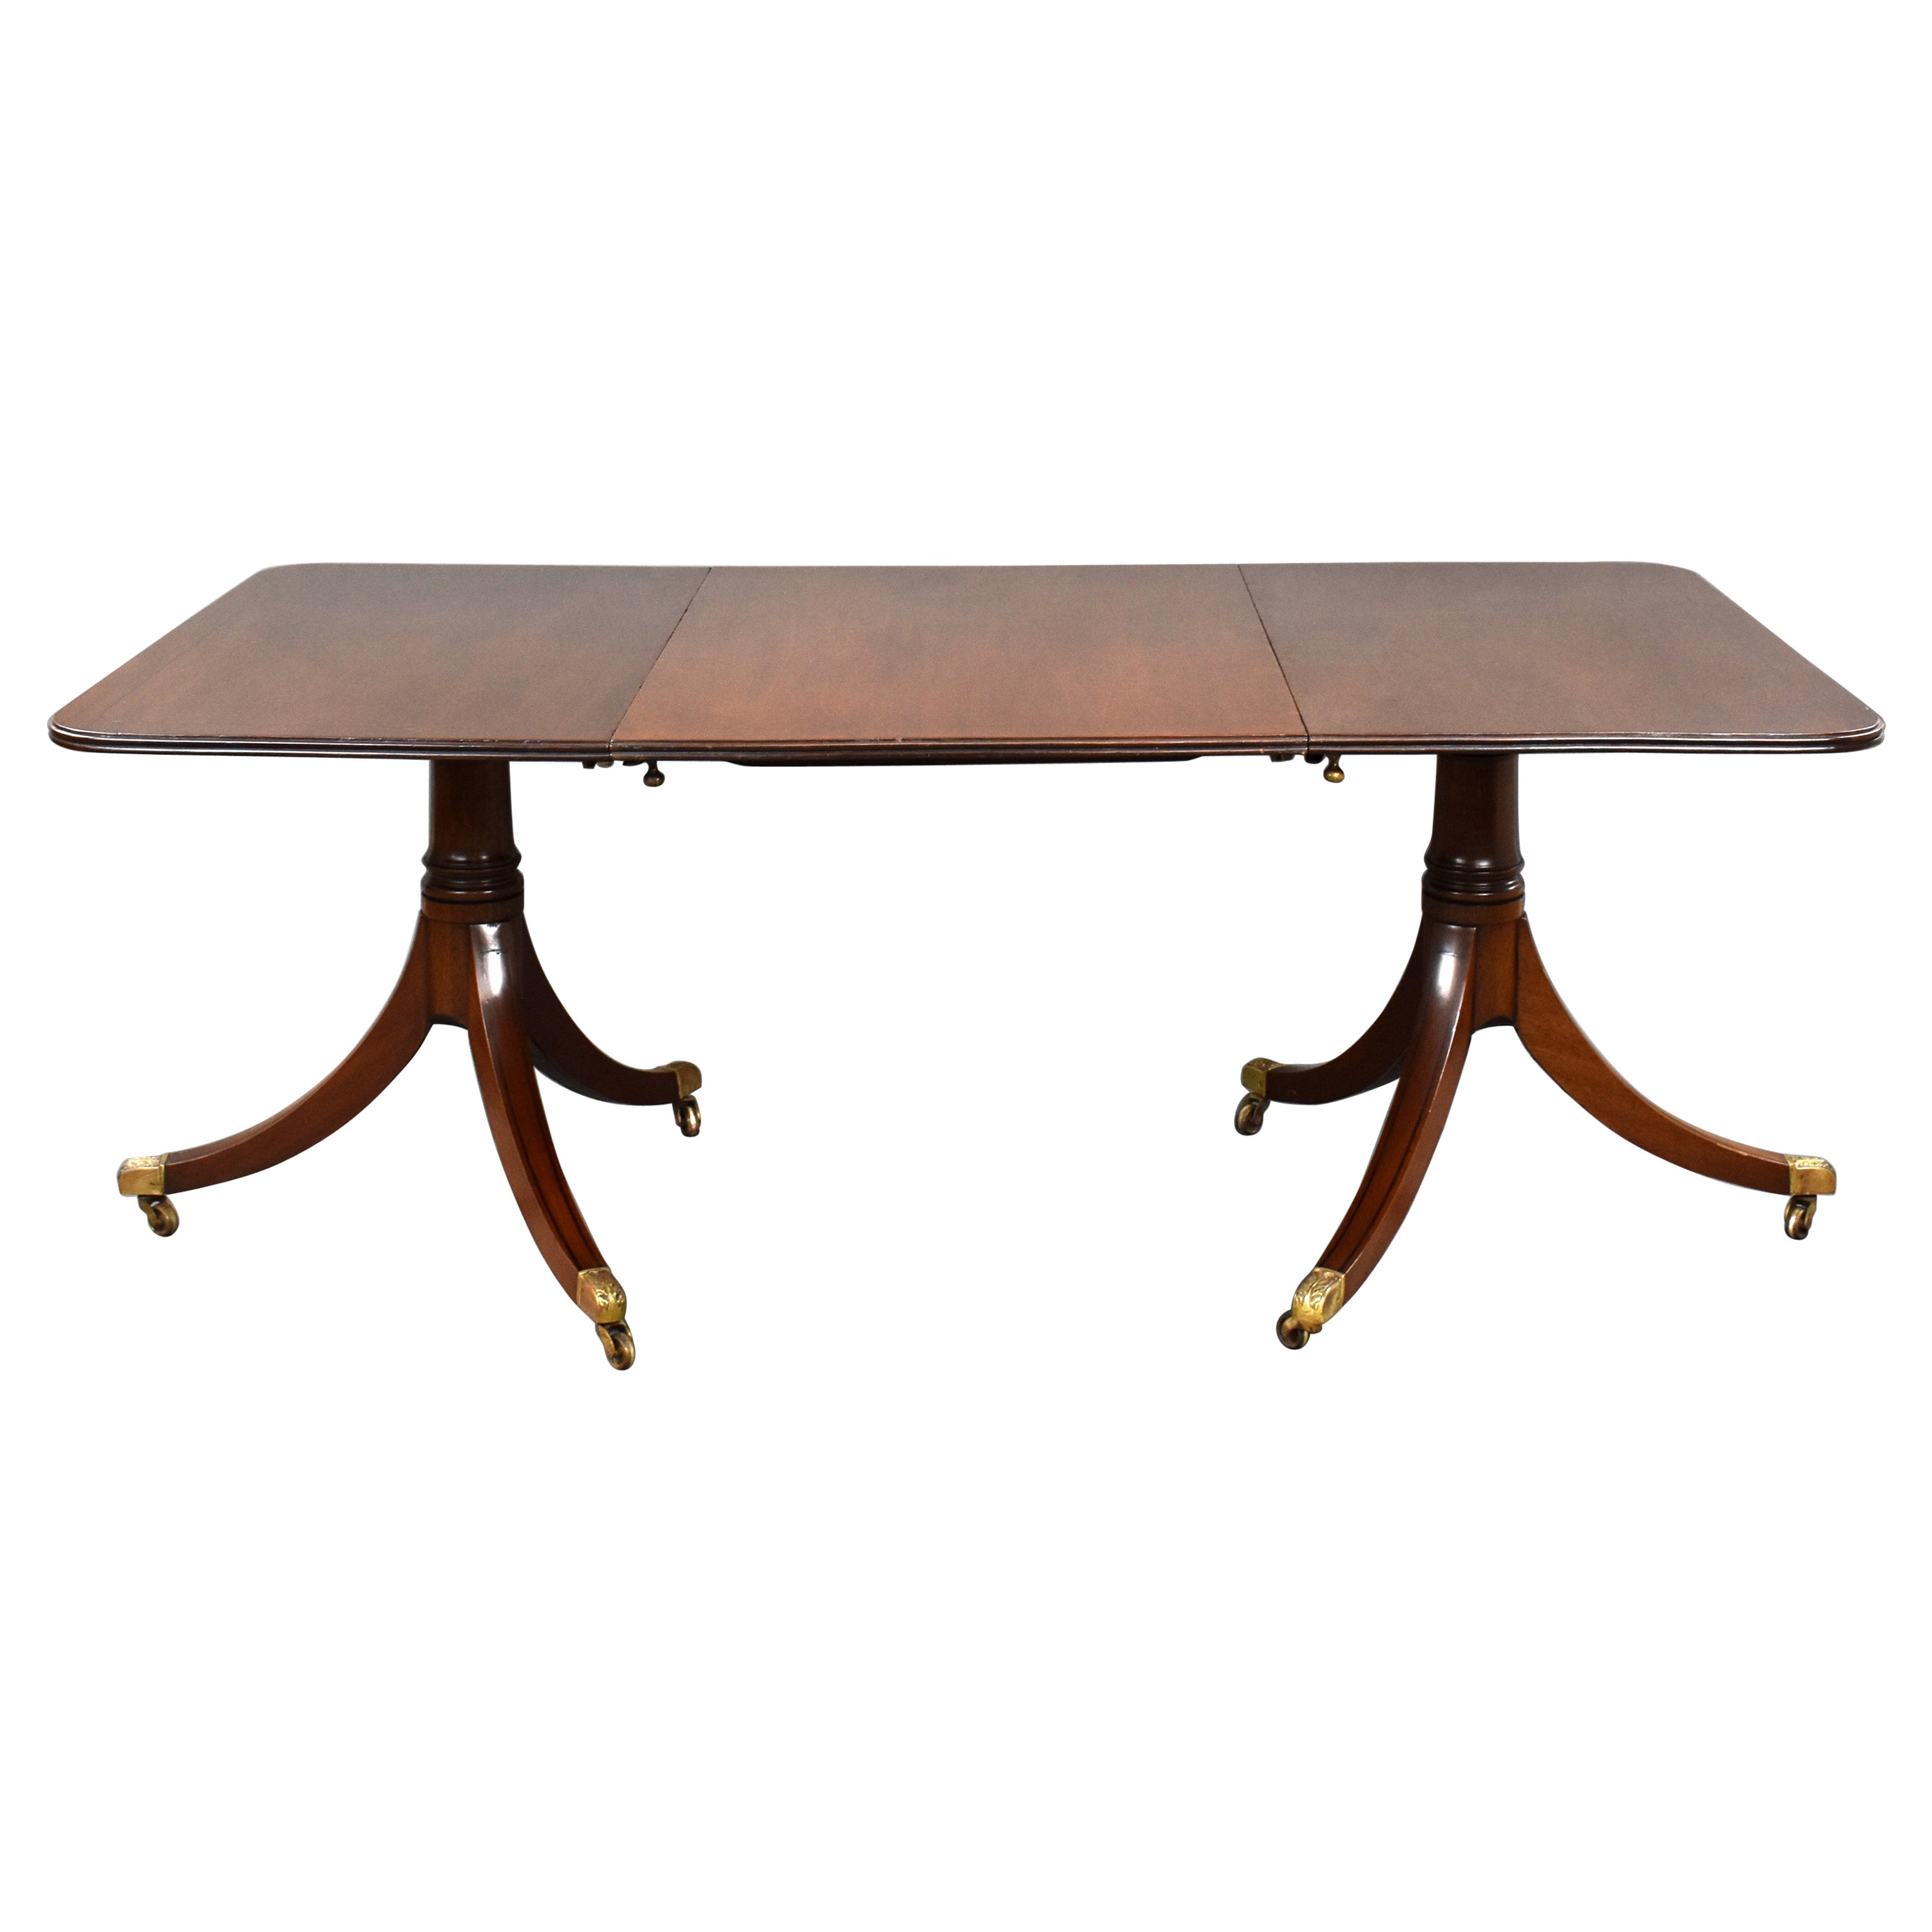 19th Century English Mahogany Pedestal Dining Table For Sale